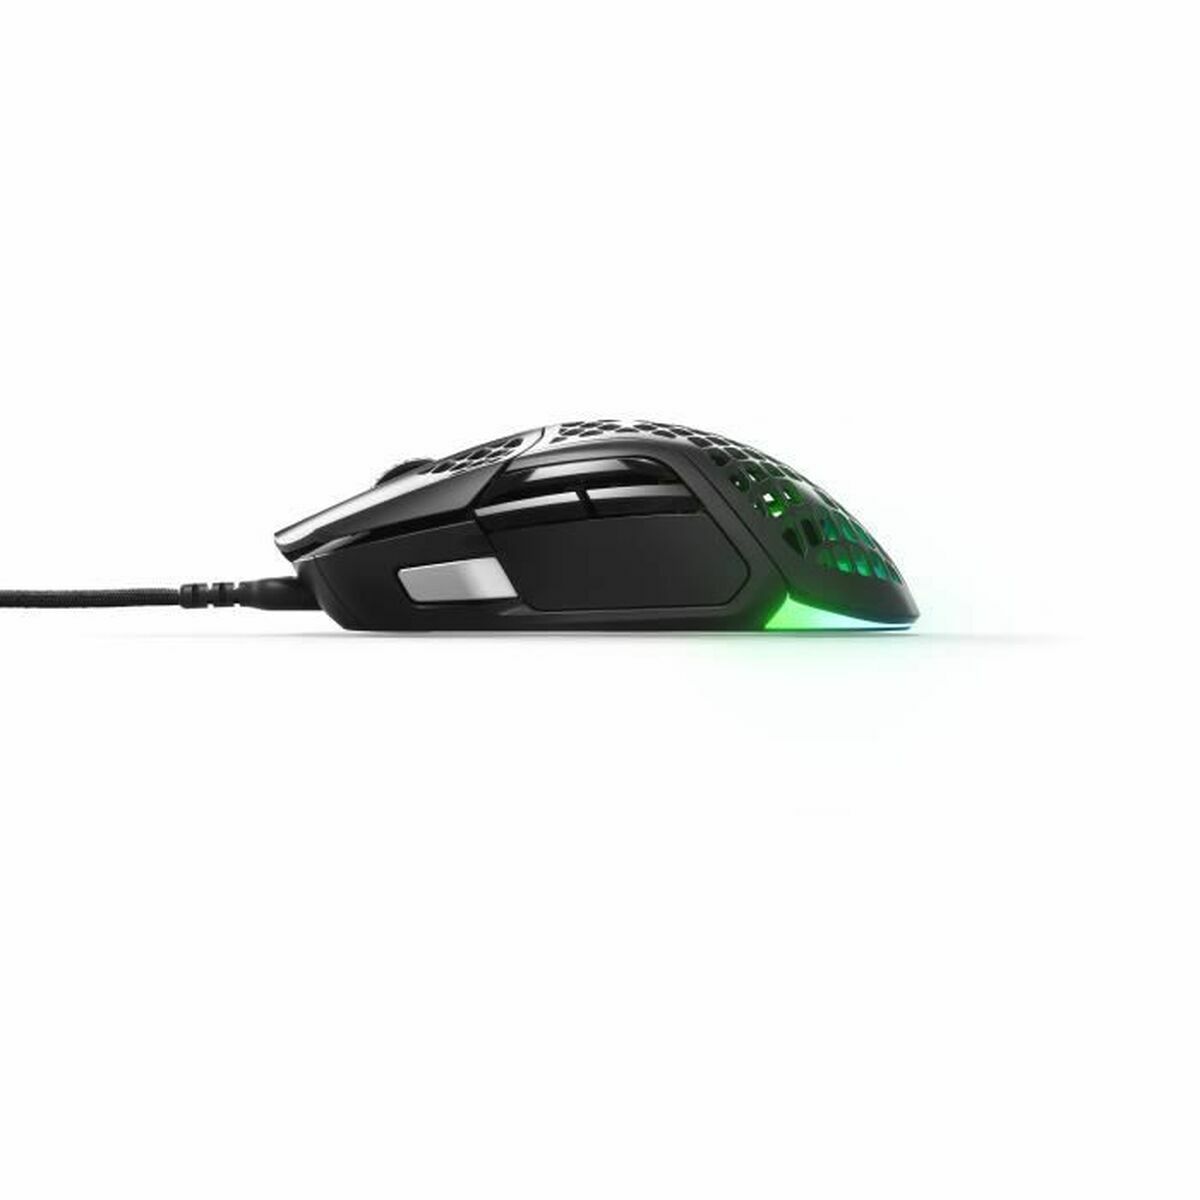 Mouse SteelSeries Aerox 5 Black Gaming LED Lights With cable, SteelSeries, Computing, Accessories, mouse-steelseries-aerox-5-black-gaming-led-lights-with-cable, :Gaming, Brand_SteelSeries, category-reference-2609, category-reference-2642, category-reference-2656, category-reference-t-19685, category-reference-t-19908, category-reference-t-21353, computers / peripherals, Condition_NEW, office, Price_100 - 200, RiotNook